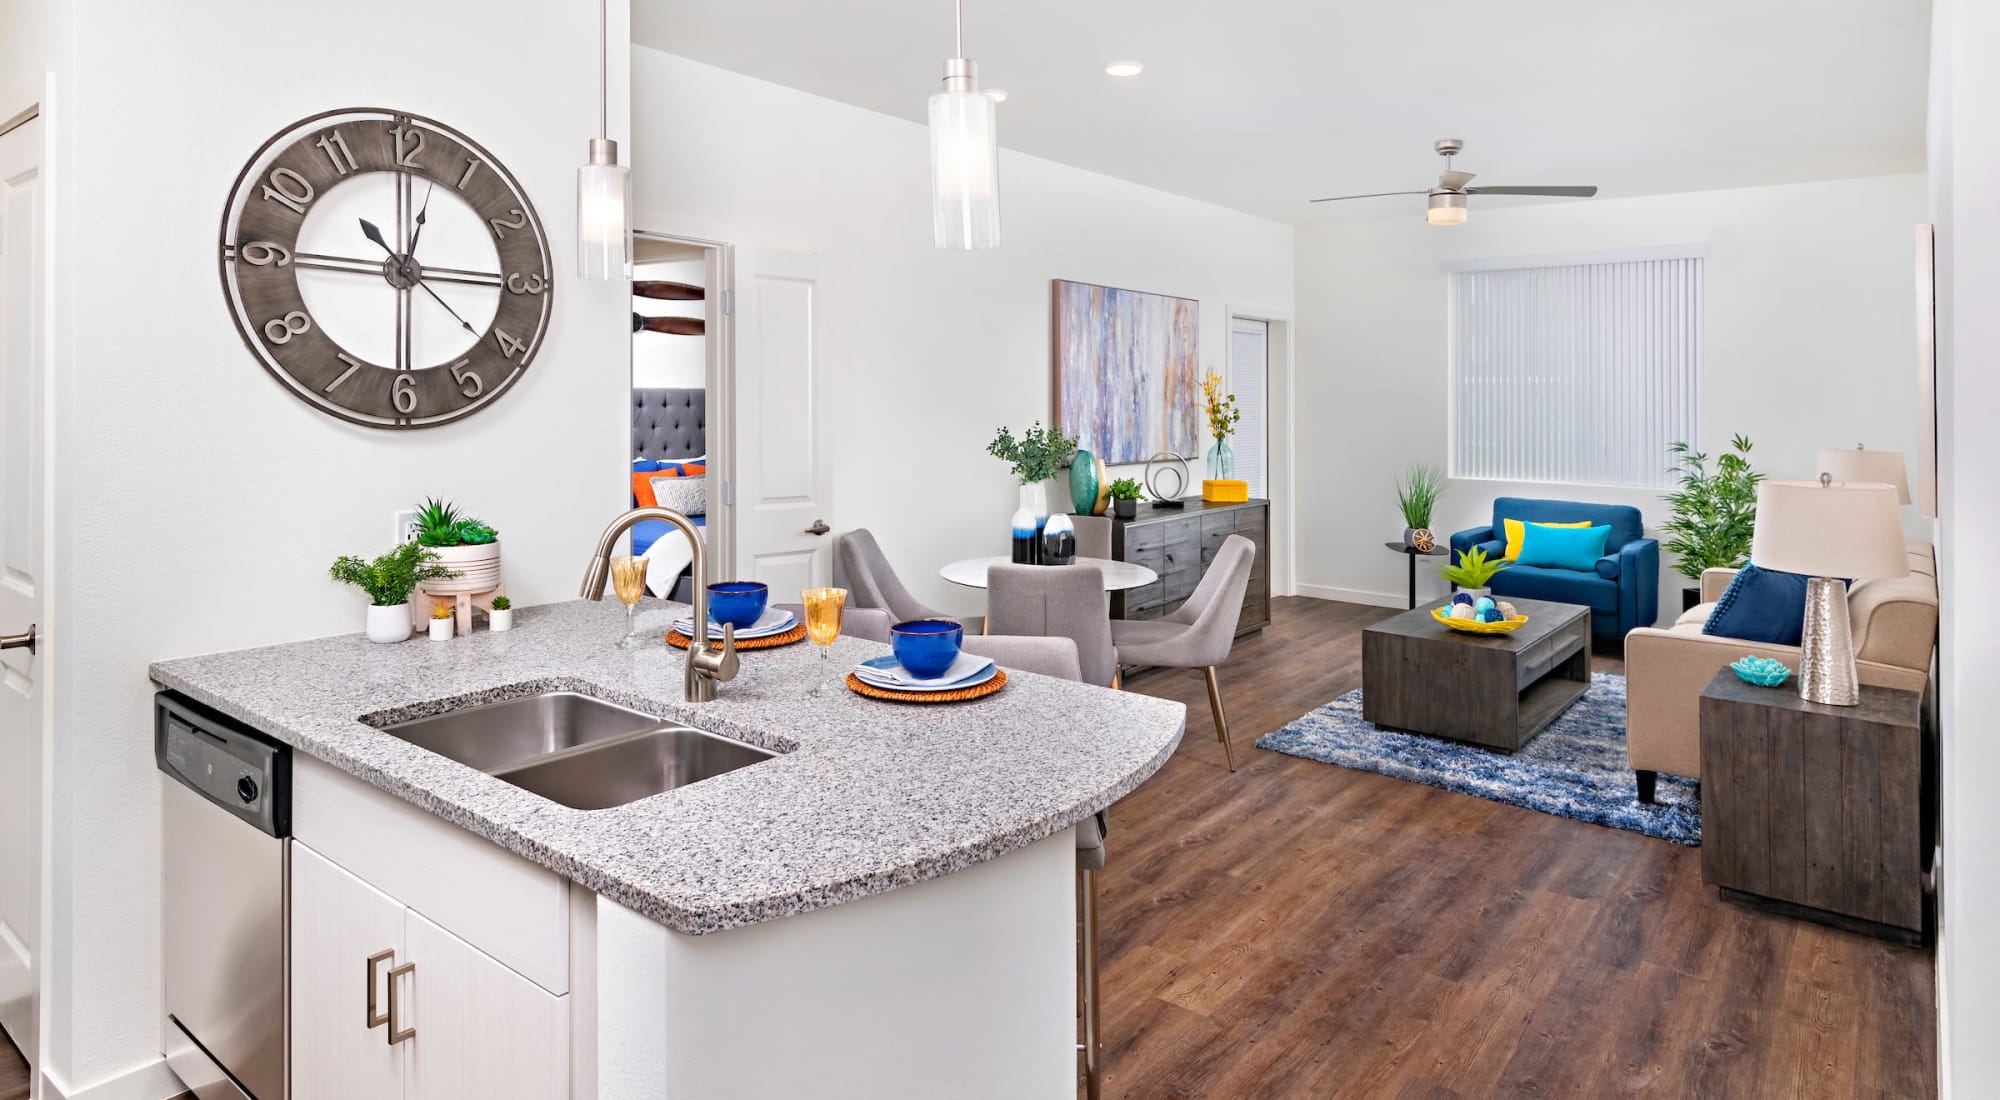 Kitchen island and living room at Sky at Chandler Airpark